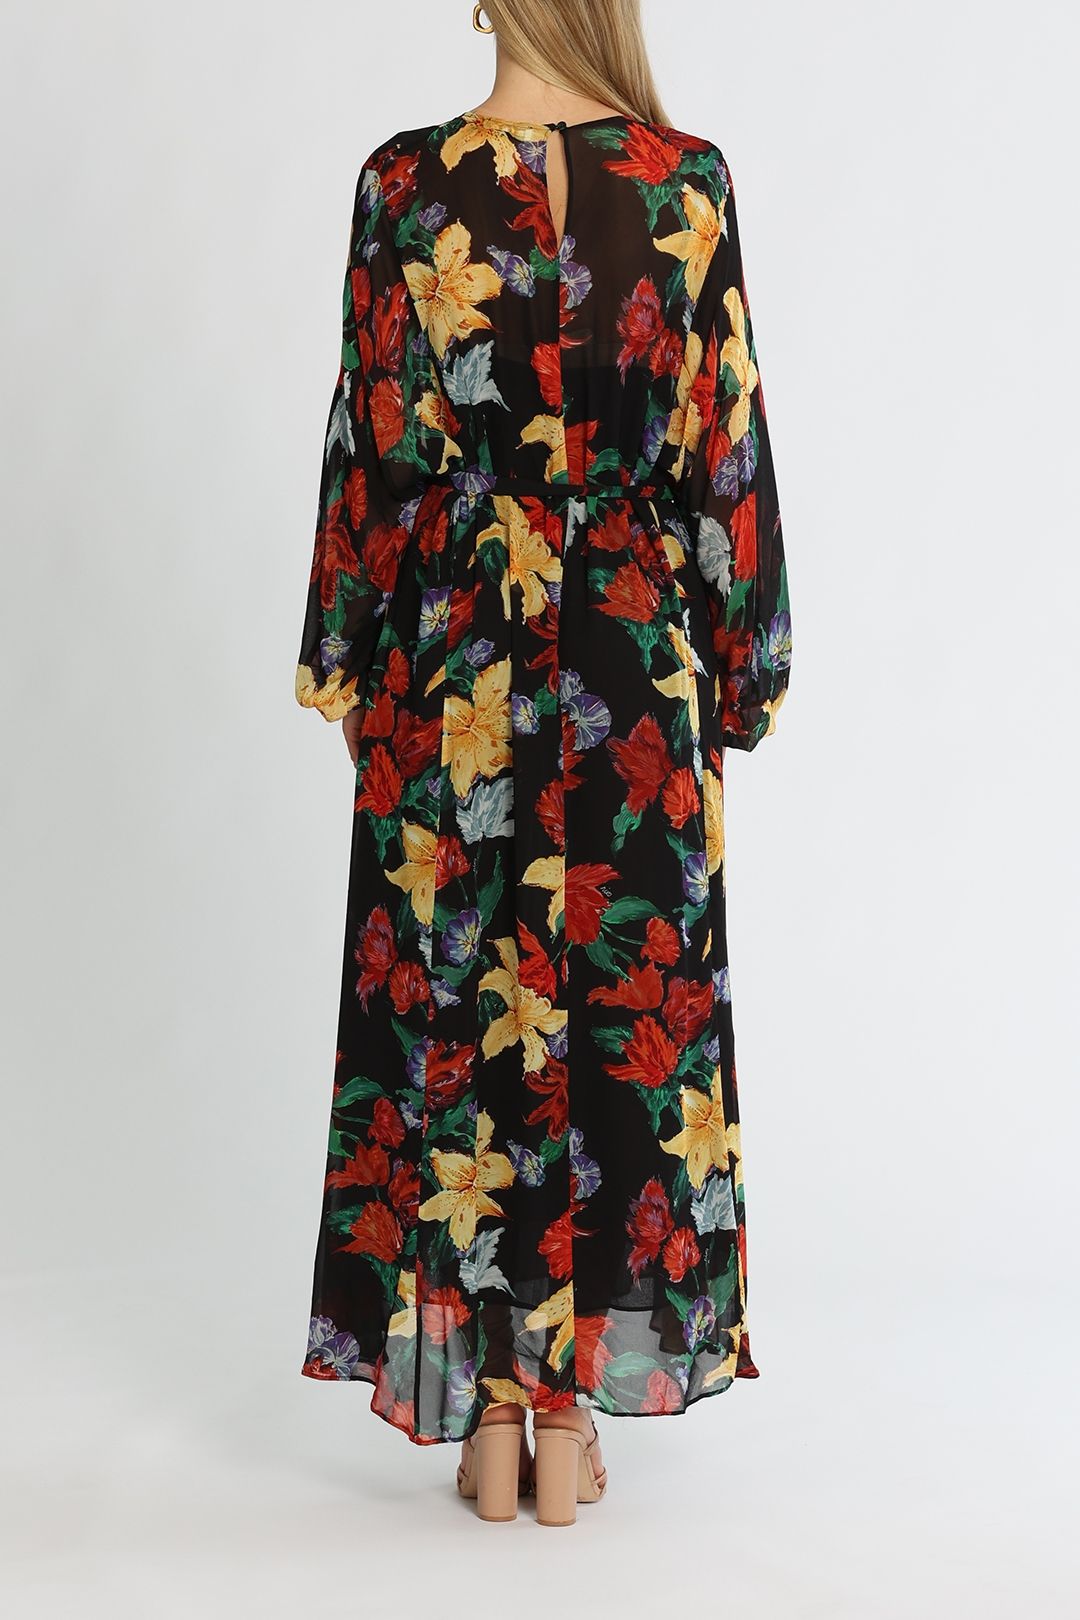 Rixo London Pia Lily Garden Belted Tent Dress Floral